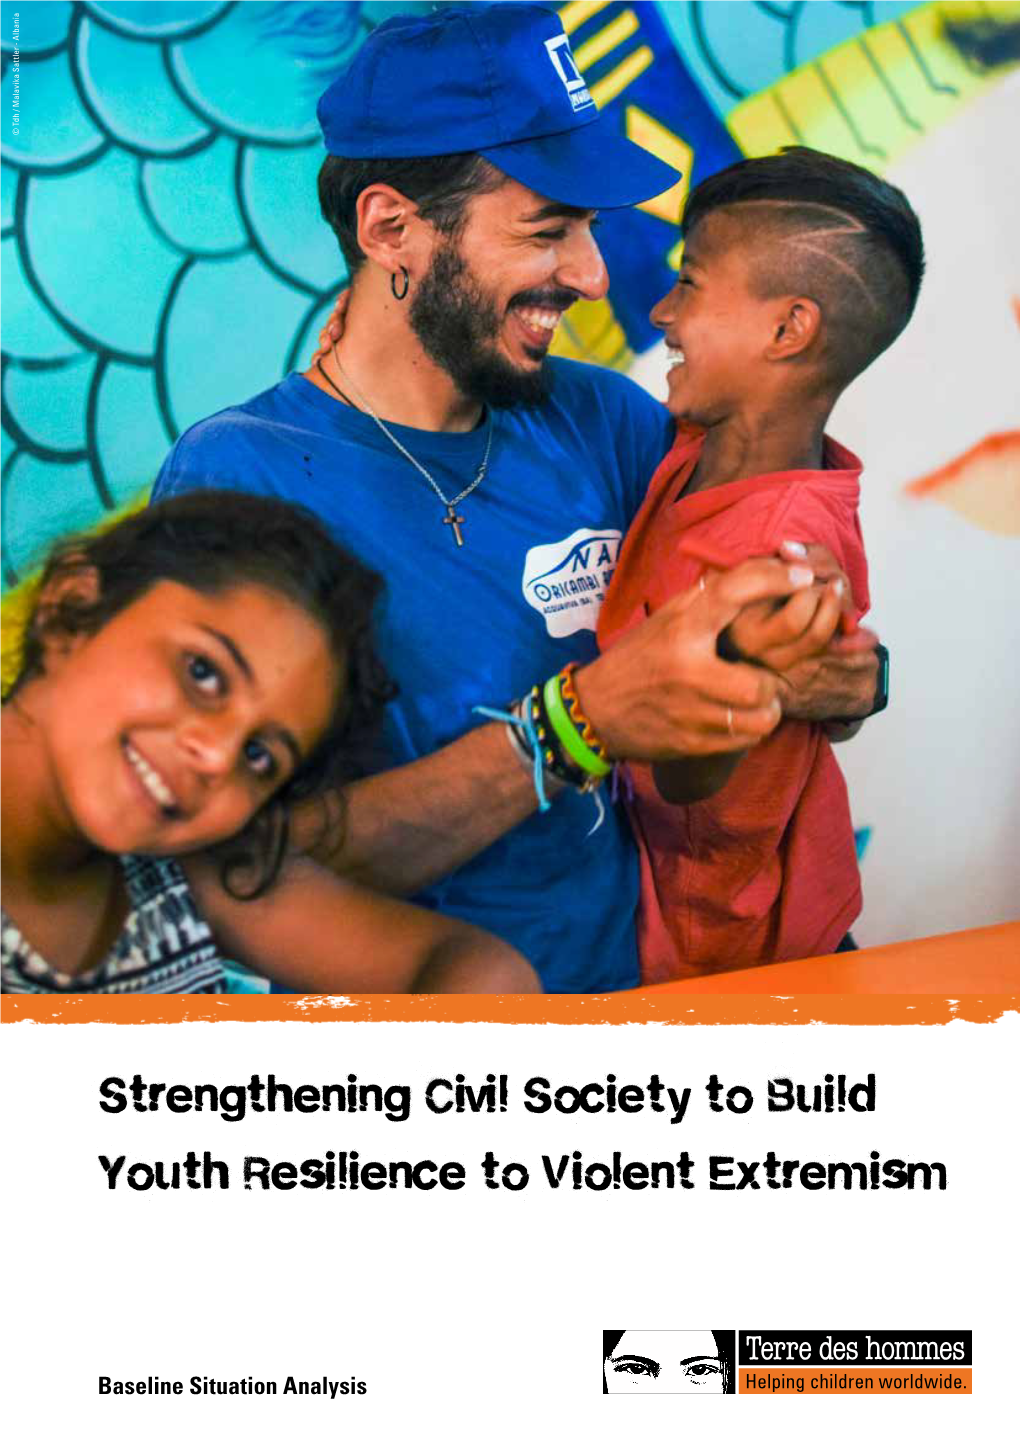 Strengthening Civil Society to Build Youth Resilience to Violent Extremism